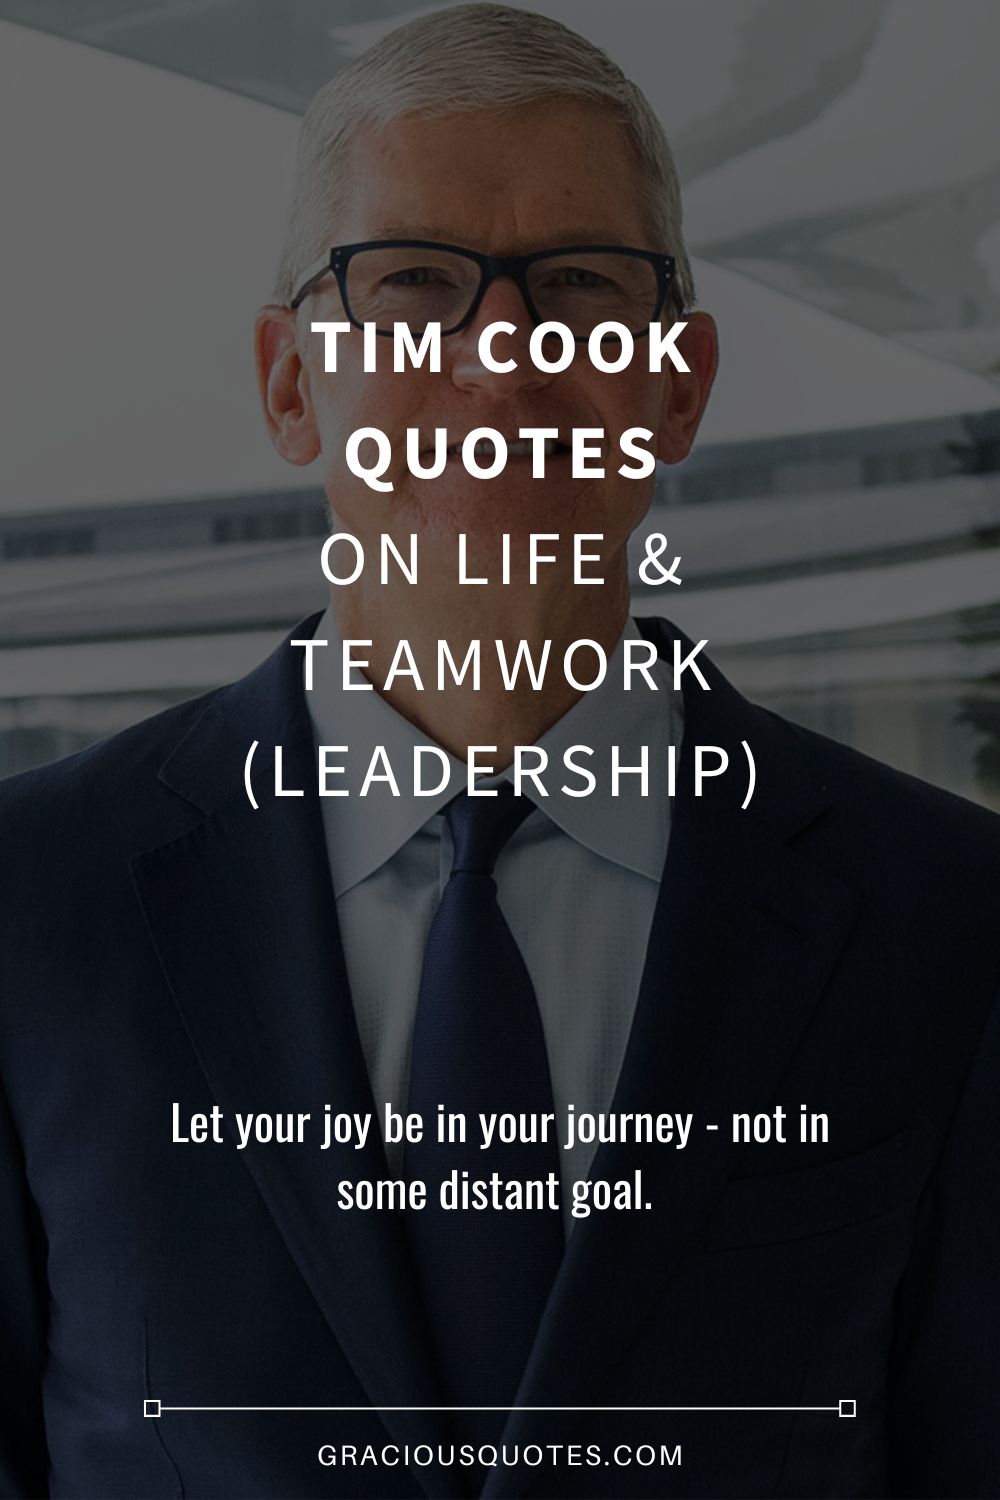 Tim Cook Quotes on Life & Teamwork (LEADERSHIP) - Gracious Quotes